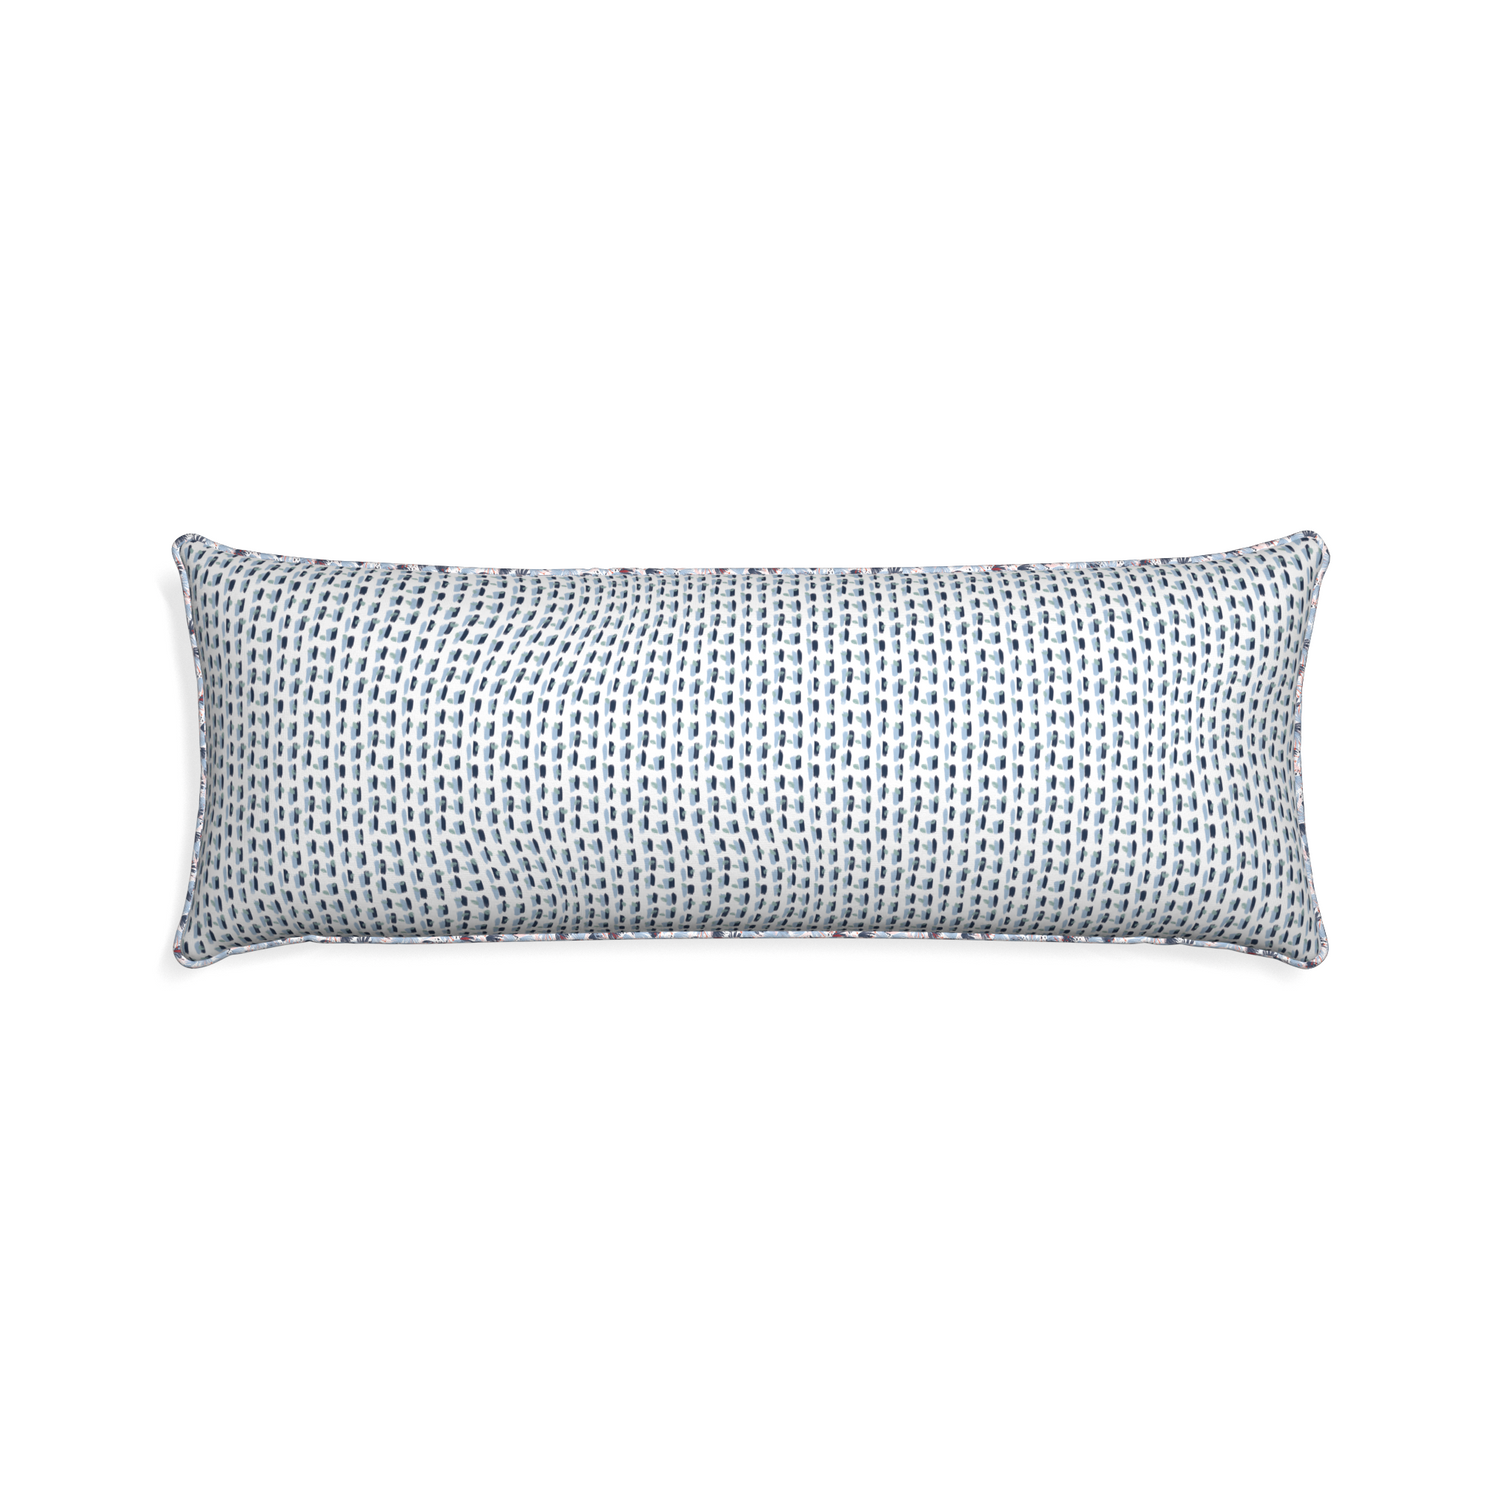 Xl-lumbar poppy blue custom pillow with e piping on white background